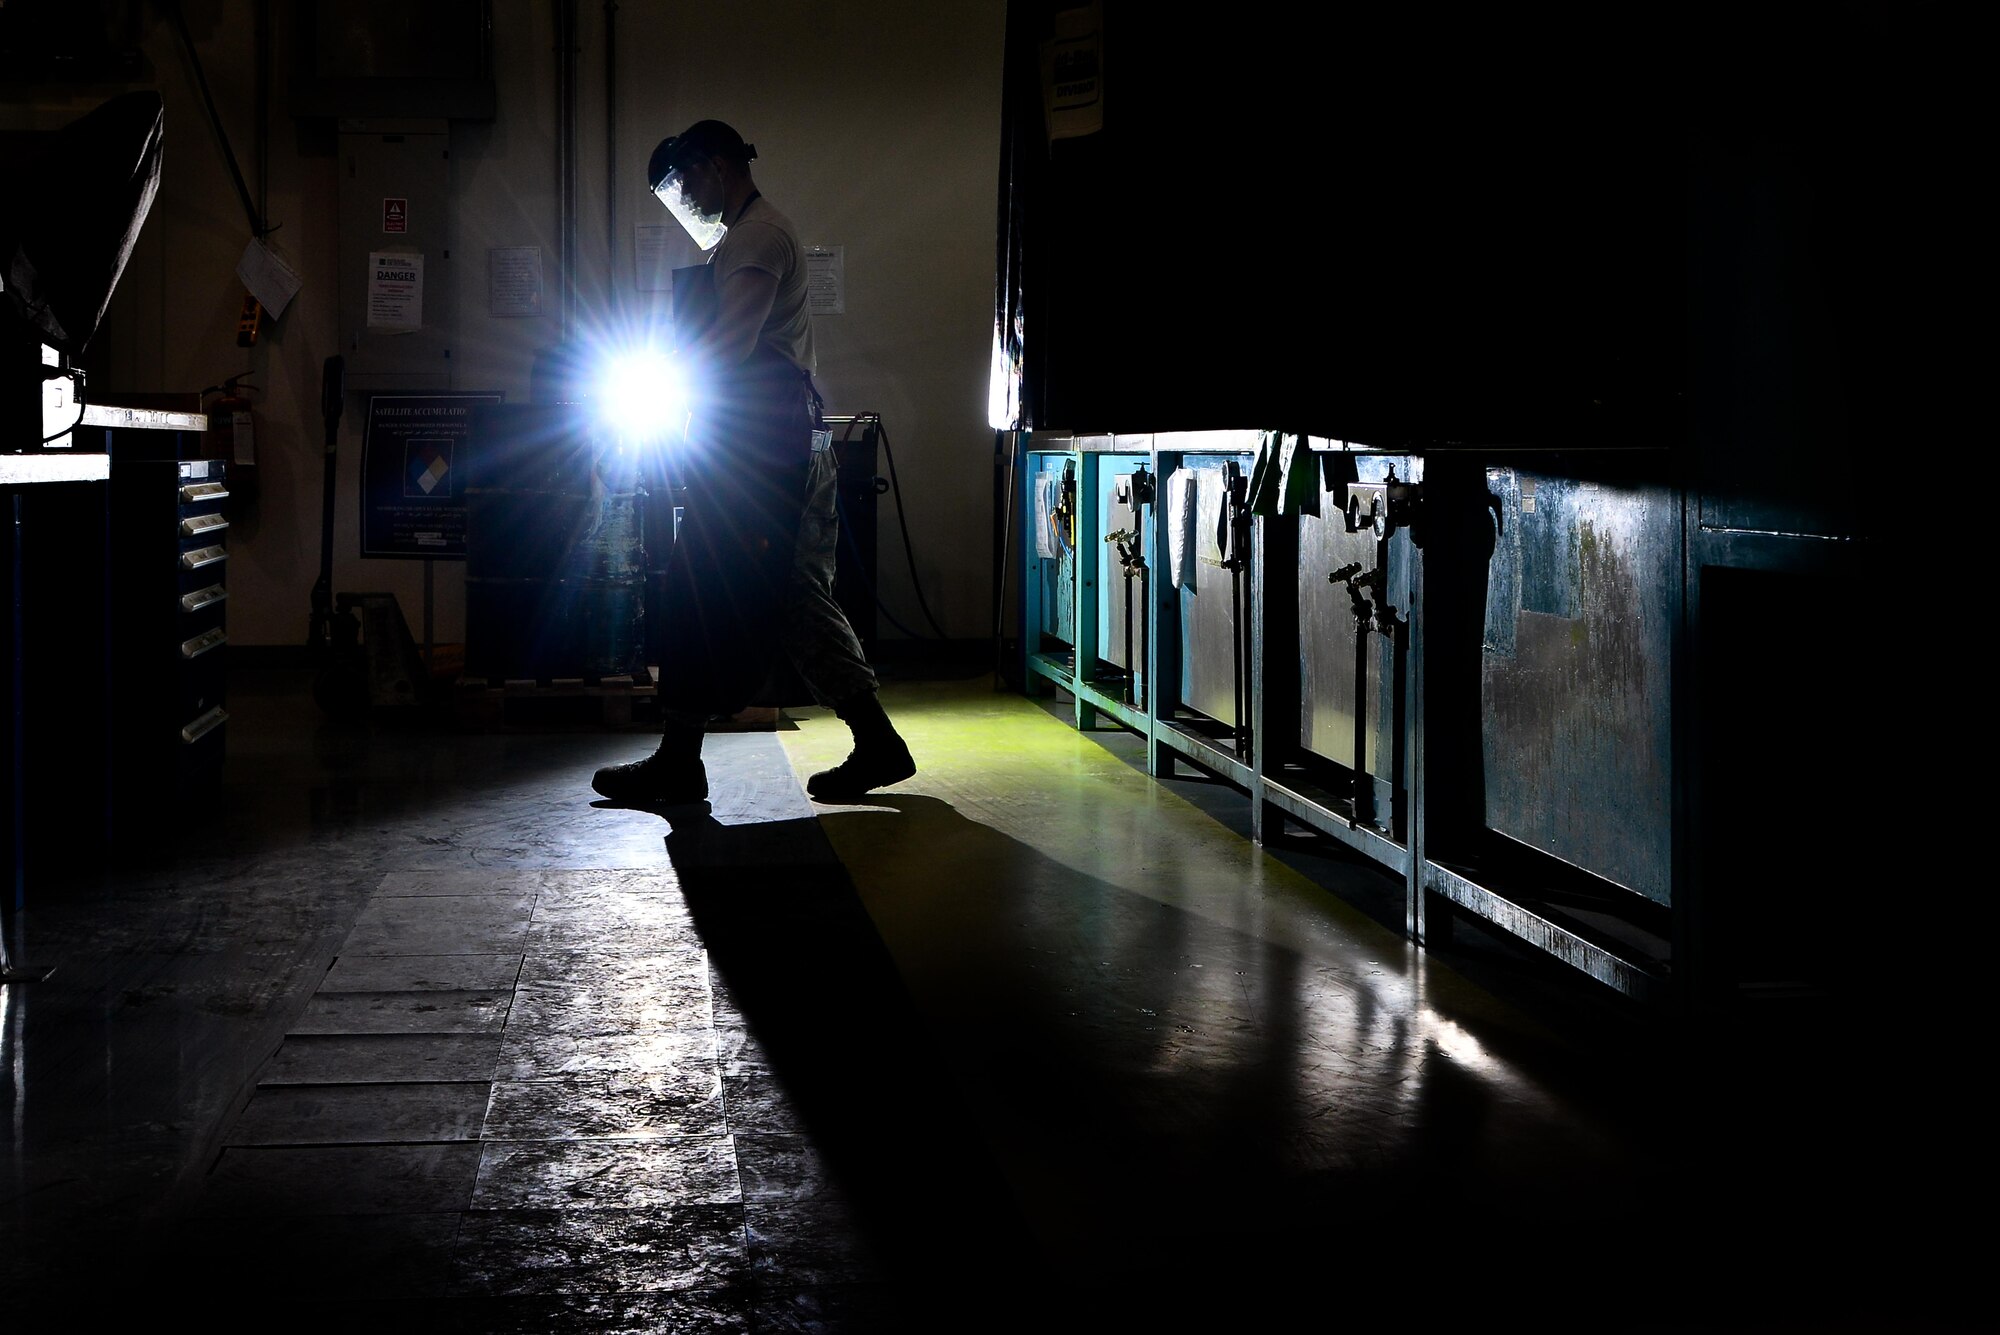 Airman 1st Class Berkeley Lopez, 379th Expeditionary Maintenance Squadron Nondestructive Inspection laboratory, leaves the inspection area after coating brake parts in fluorescent liquid penetrant to let them soak for 30 minutes before the inspection process August 12, 2015 at Al Udeid Air Base, Qatar. NDI Airmen inspect for cracks and flaws on aircraft and their components, aerospace ground equipment and safety equipment.  They also test jet engine oil samples, using a variety of methods, like magnetic particle, fluorescent penetrant, eddy current, radiography, optical and ultrasonic equipment. (U.S. Air Force photo/Staff Sgt. Alexandre Montes)   